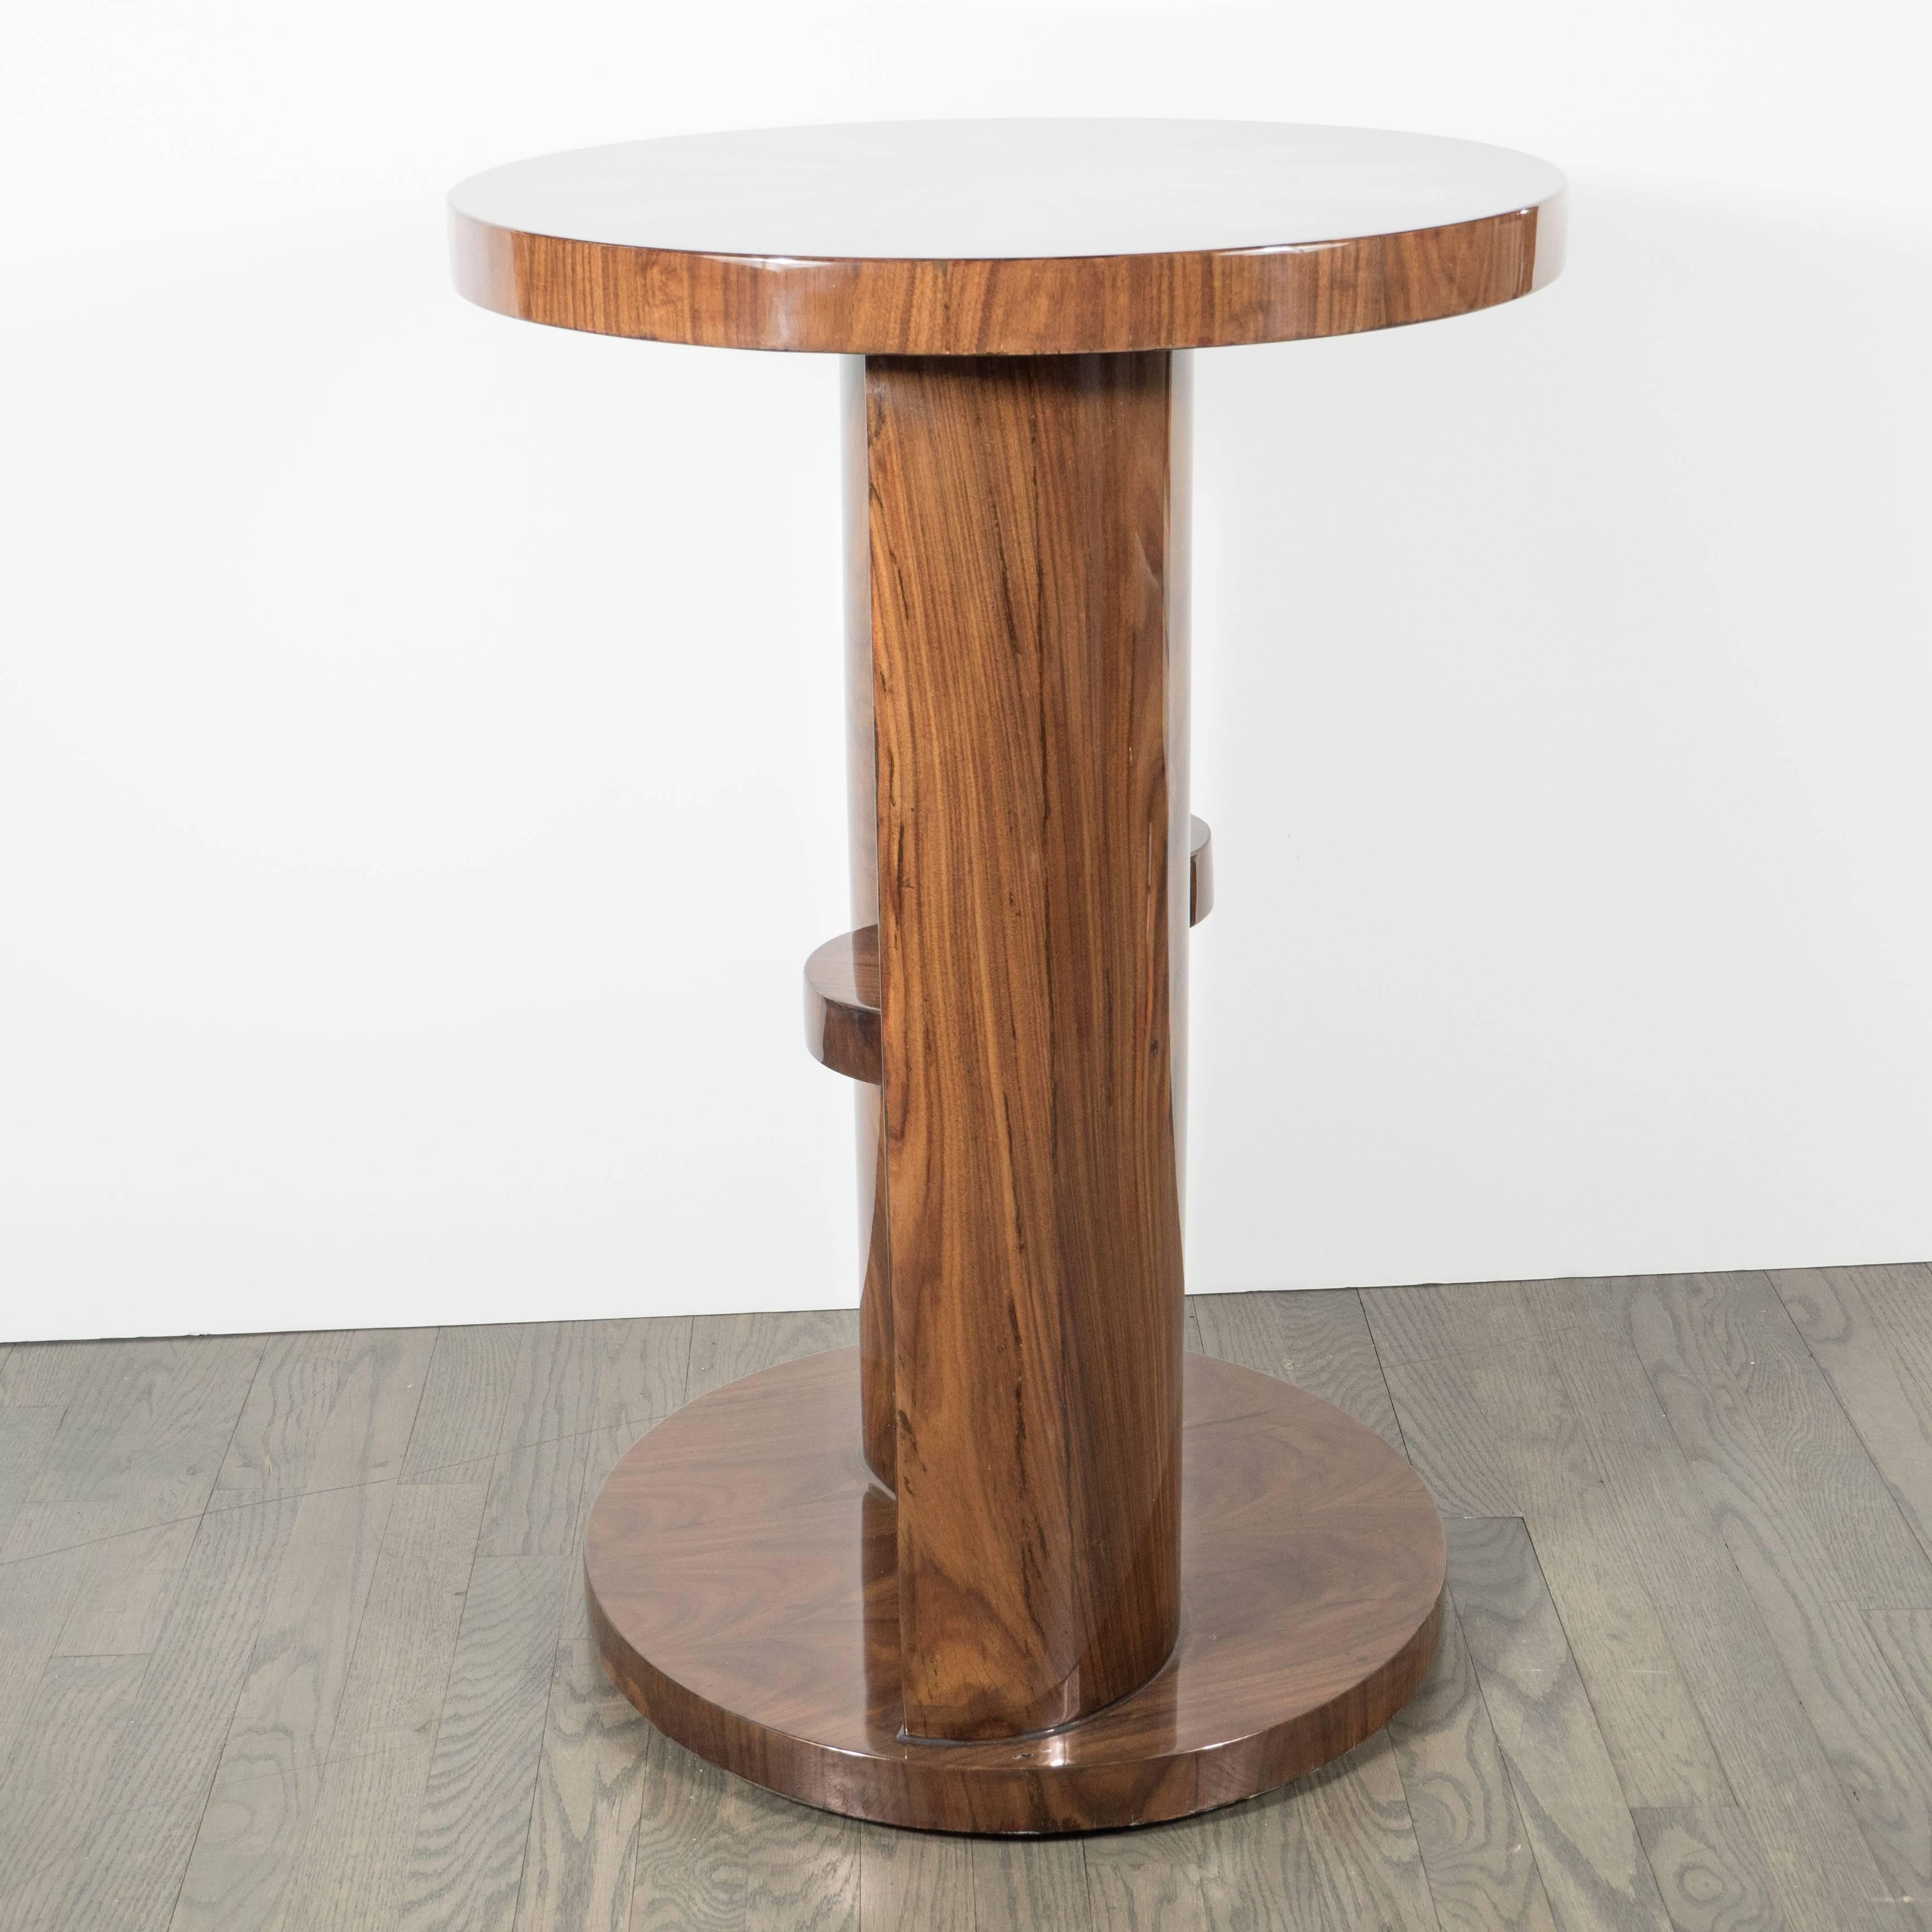 French Art Deco Inlaid Starburst Table/ Pedestal in Bookmatched Burled Walnut & Elm For Sale